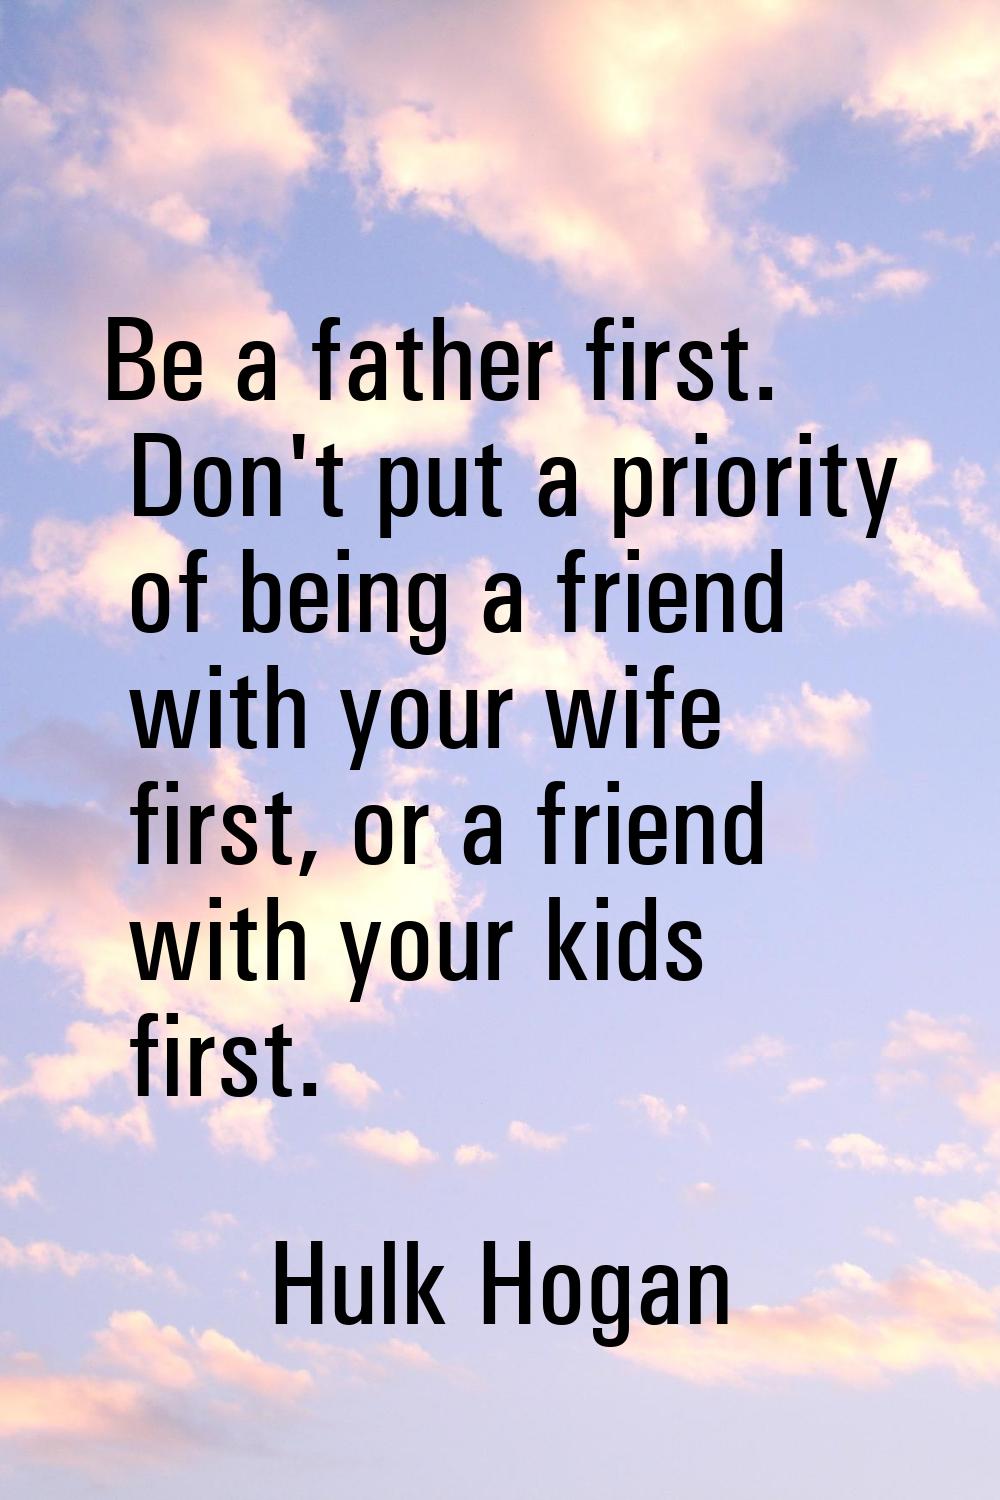 Be a father first. Don't put a priority of being a friend with your wife first, or a friend with yo